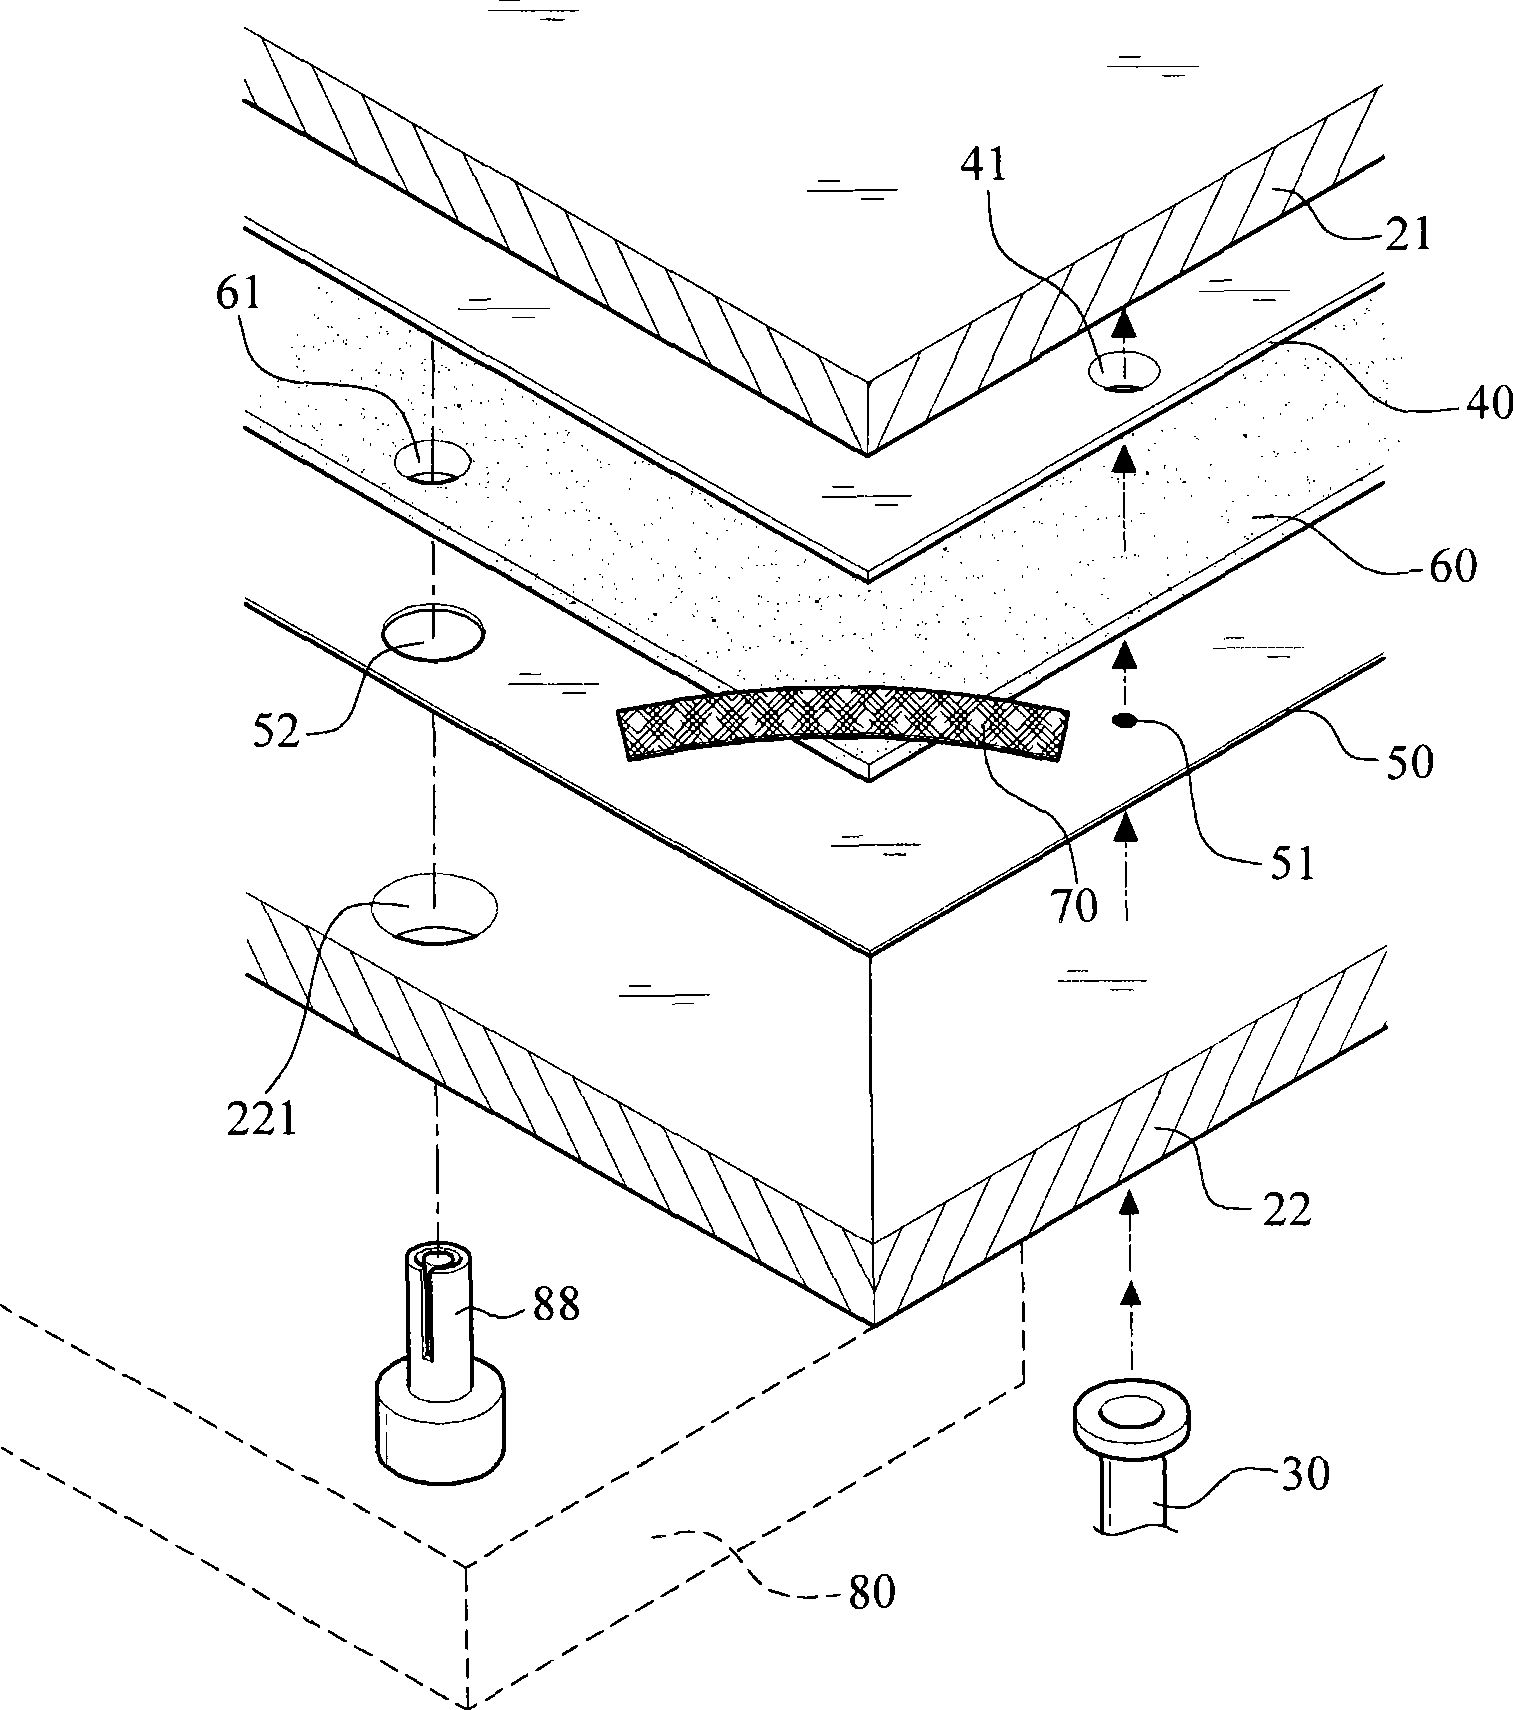 Double-faced exposure architecture and double-faced exposure method of printed circuit board